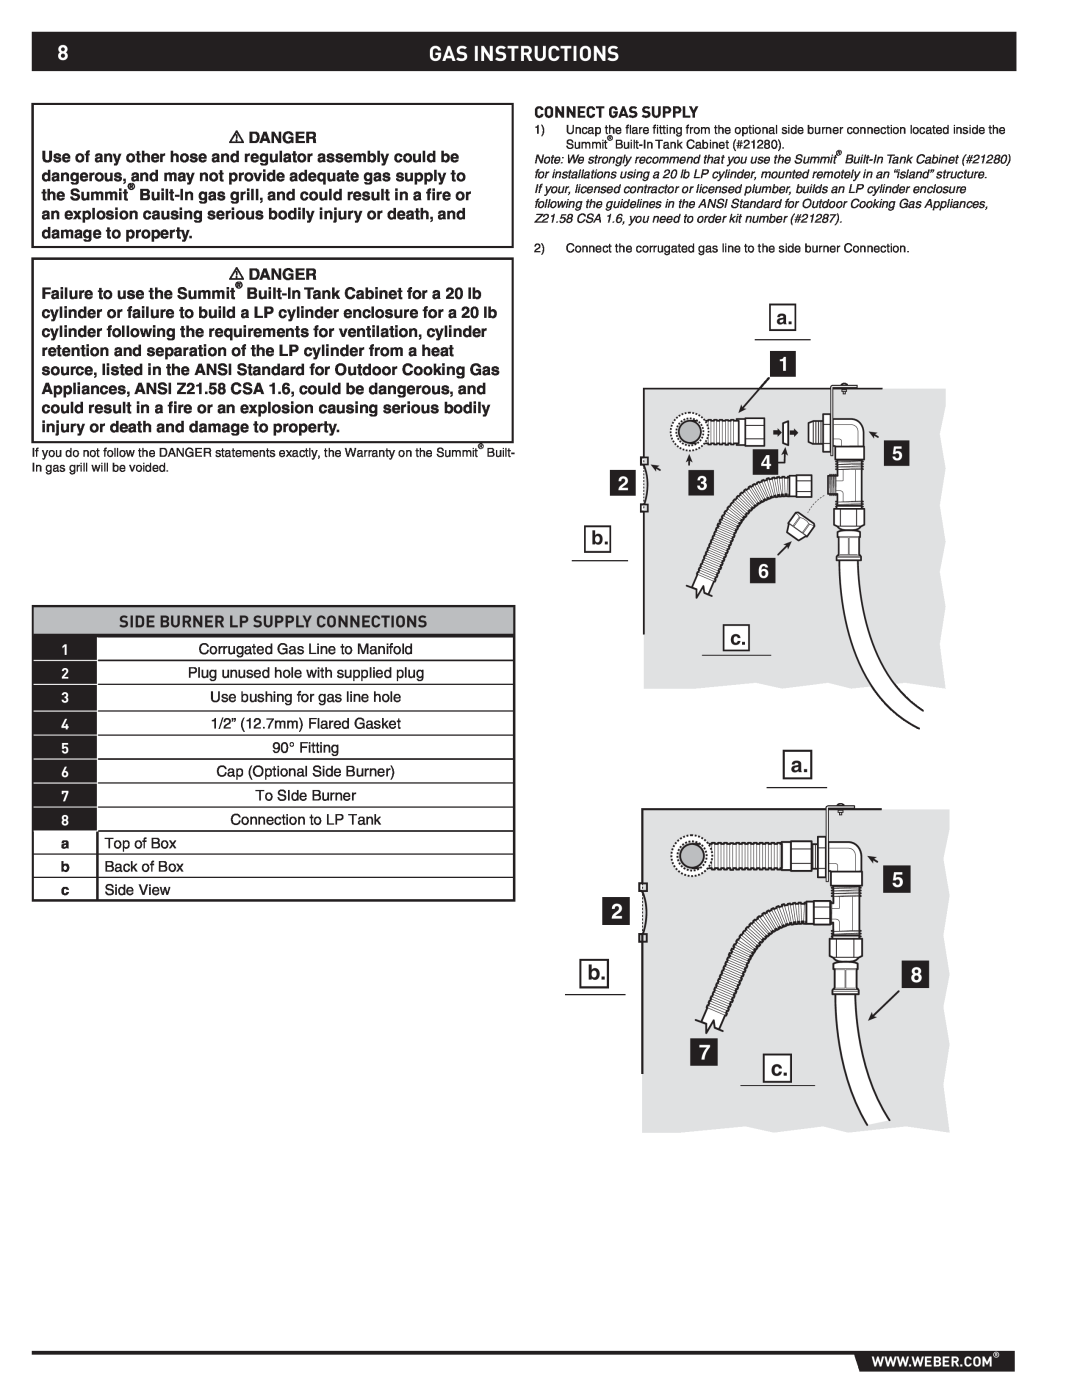 Weber 89796 manual Gas Instructions, Side Burner Lp Supply Connections 